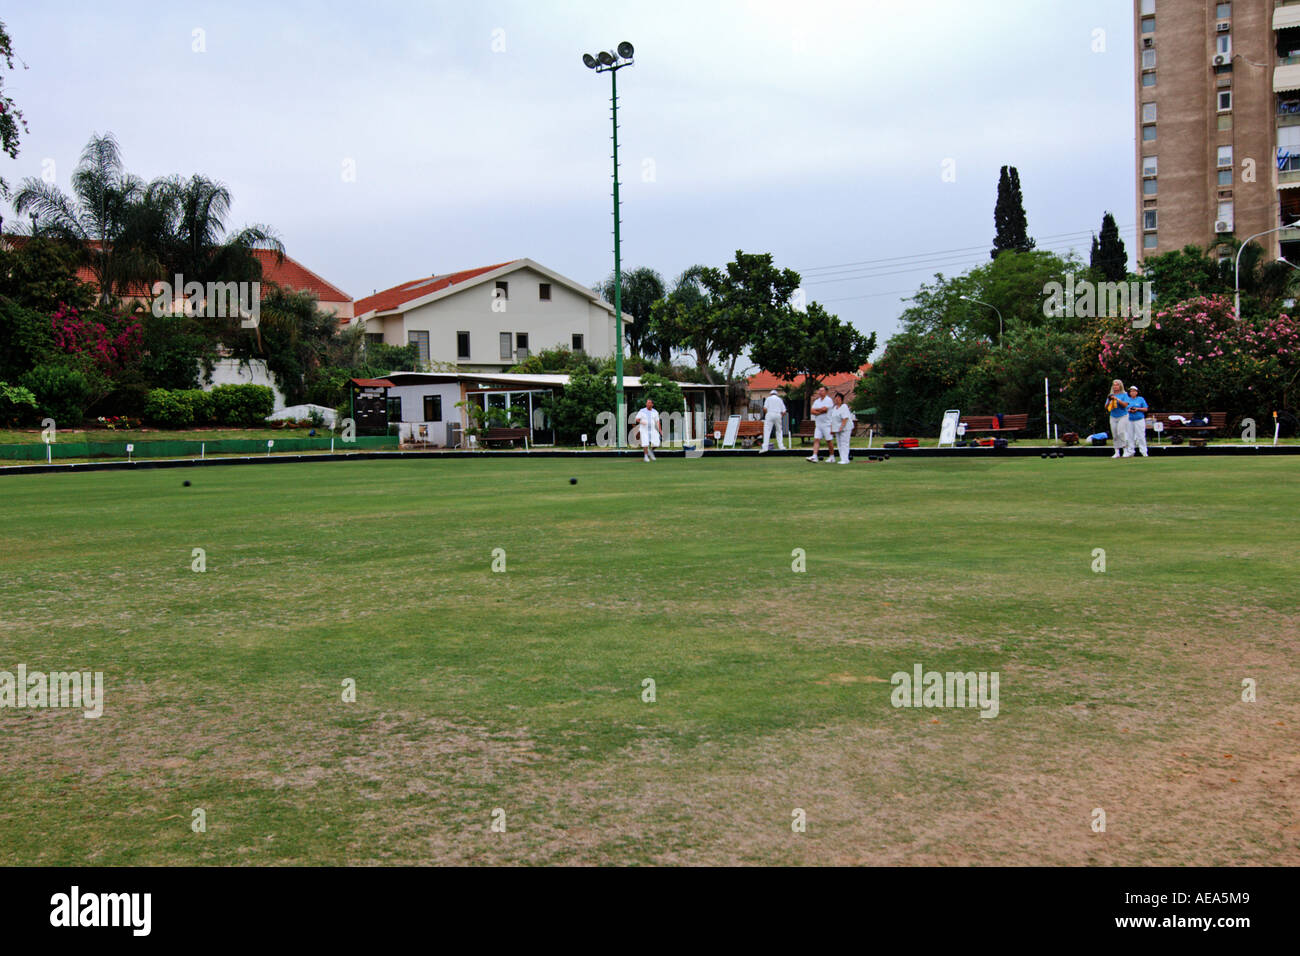 Team play on a Lawn bowling green Stock Photo